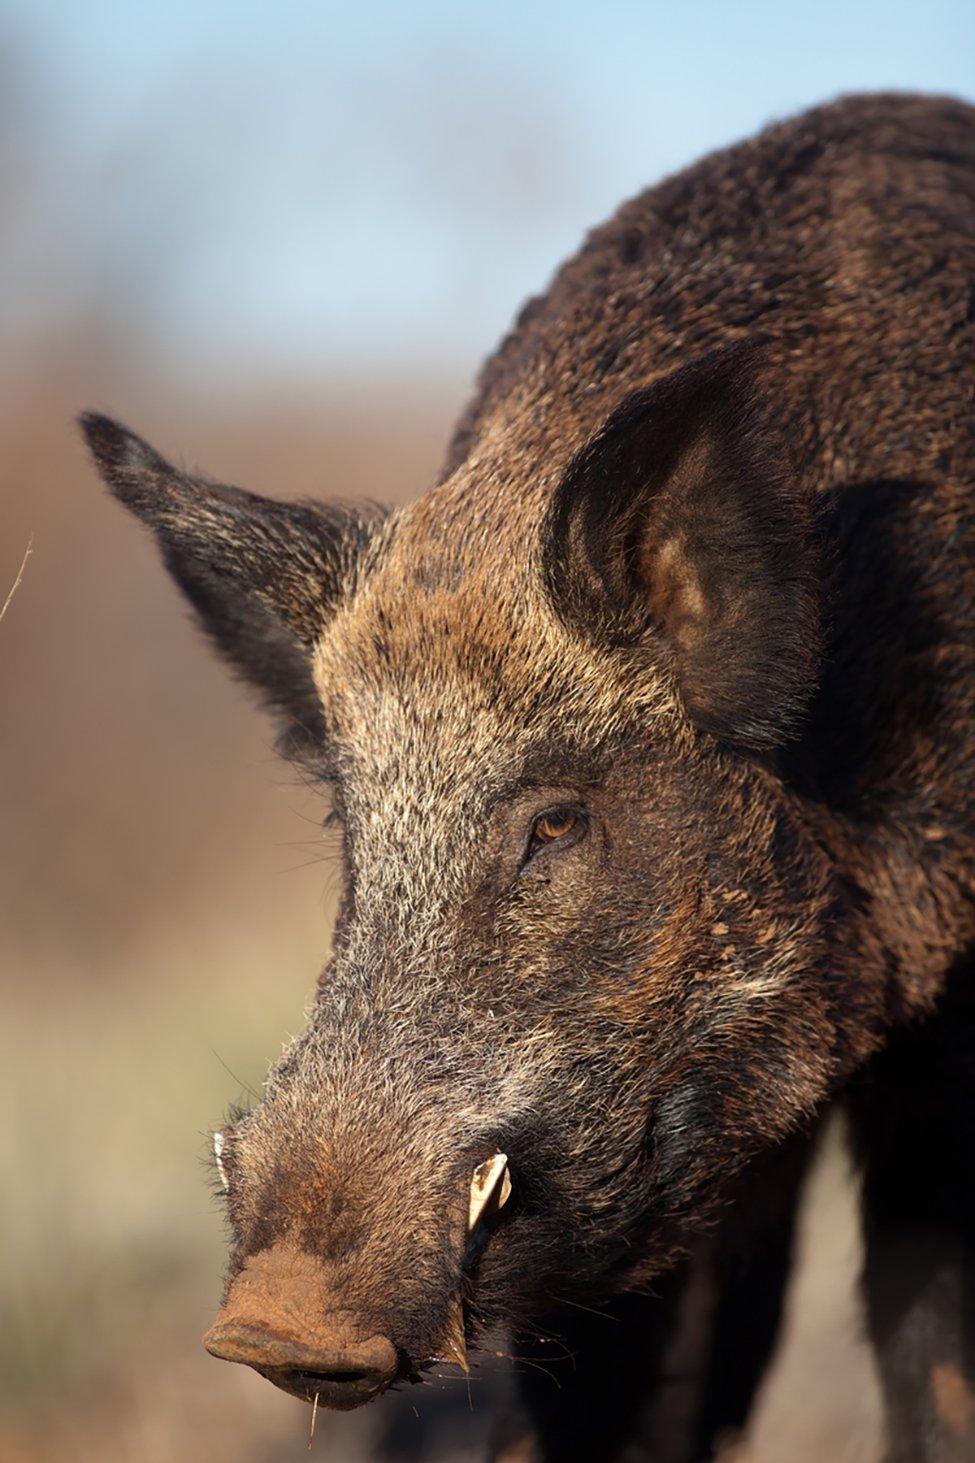 Stalking hogs isn't an easy task. (Russell Graves photo)